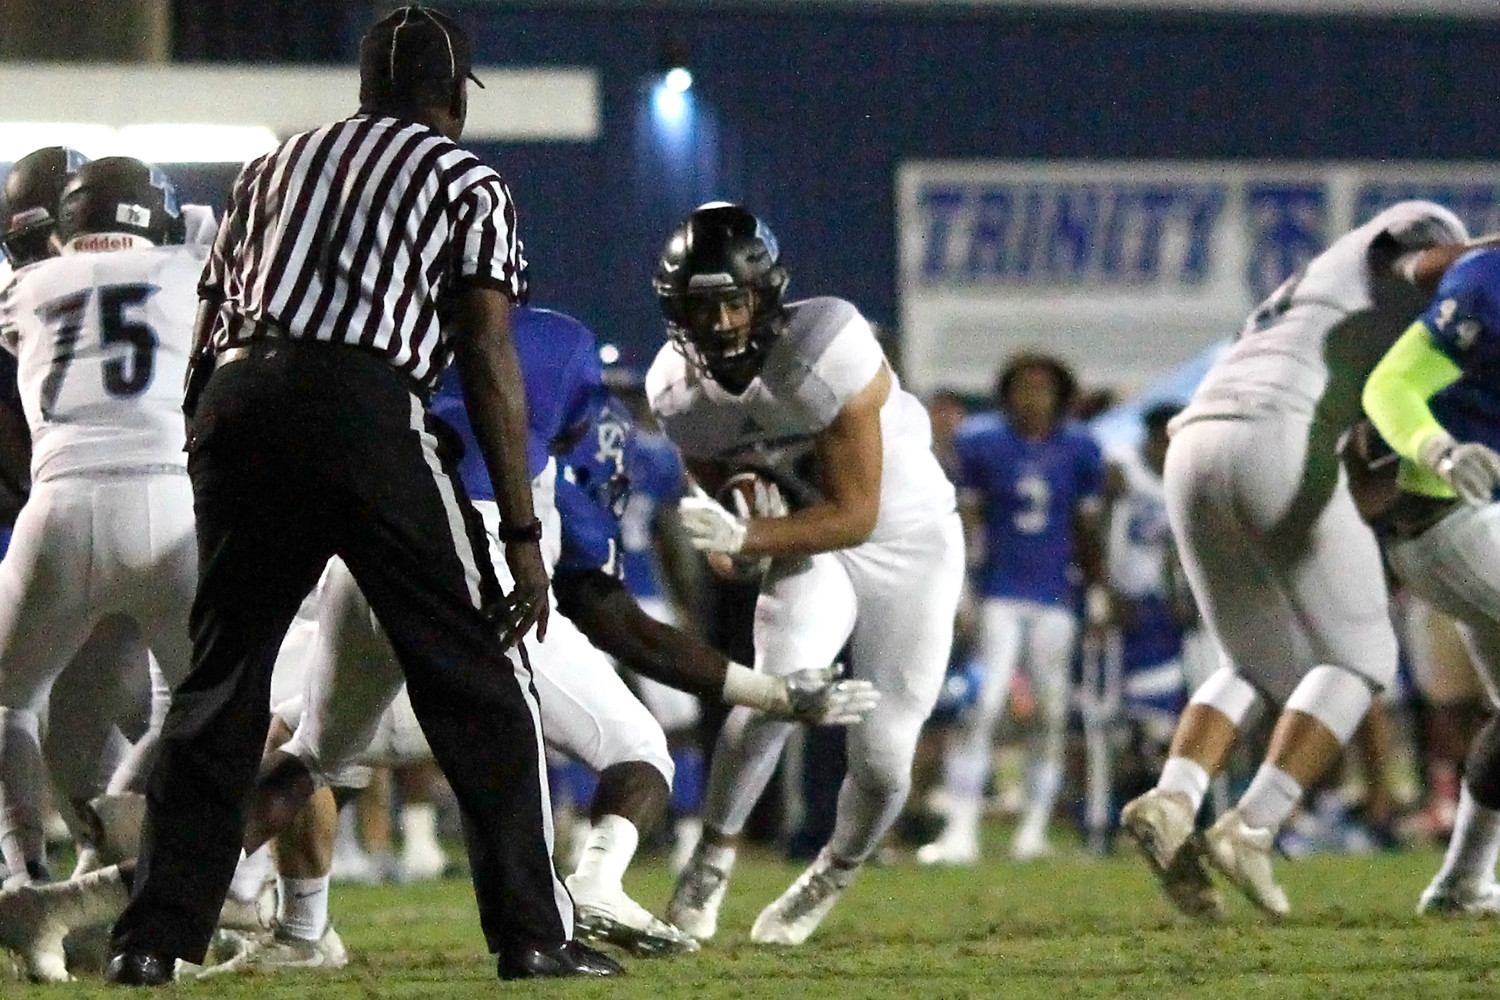 Collin Magill picks up some tough yards for the Sharks.